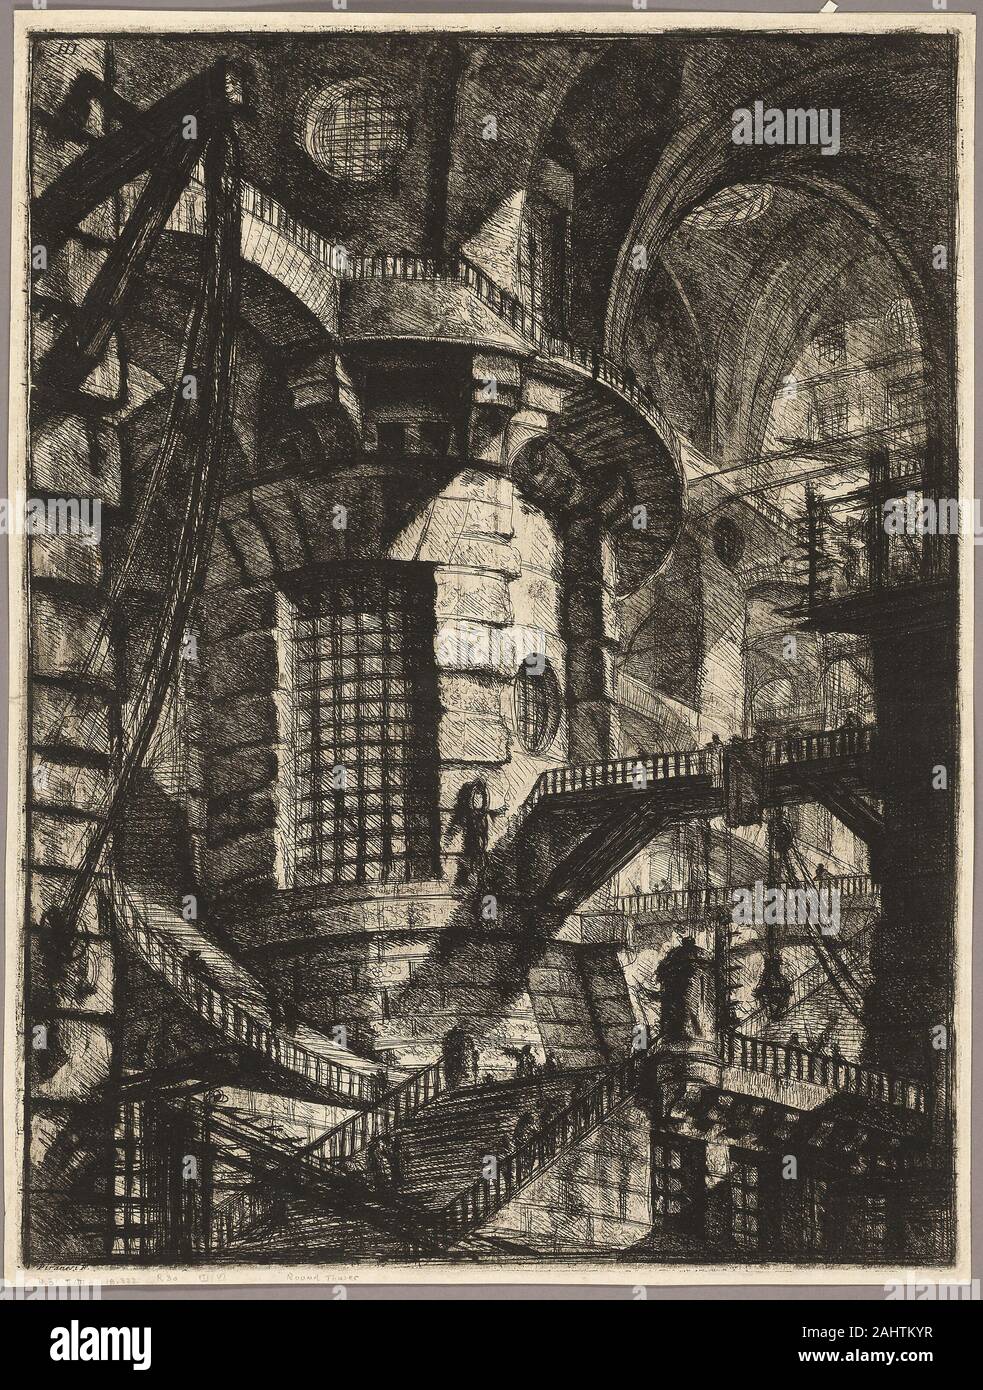 Giovanni Battista Piranesi. The Round Tower, plate 3 from the second edition of Carceri d'invenzione (Imaginary Prisons). 1761–1765. Italy. Etching, engraving, sulphur tint, and burnishing in black on ivory laid paper In addition to dramatic views of Roman architecture, Giovanni Battista Piranesi created a series of prison interiors that were entirely invented. These vast, entangled passageways and cavernous chambers were first printed around 1750. Ten years later, Piranesi reworked the plates, heightening their ominousstate in an implied critique of social injustice. Stock Photo